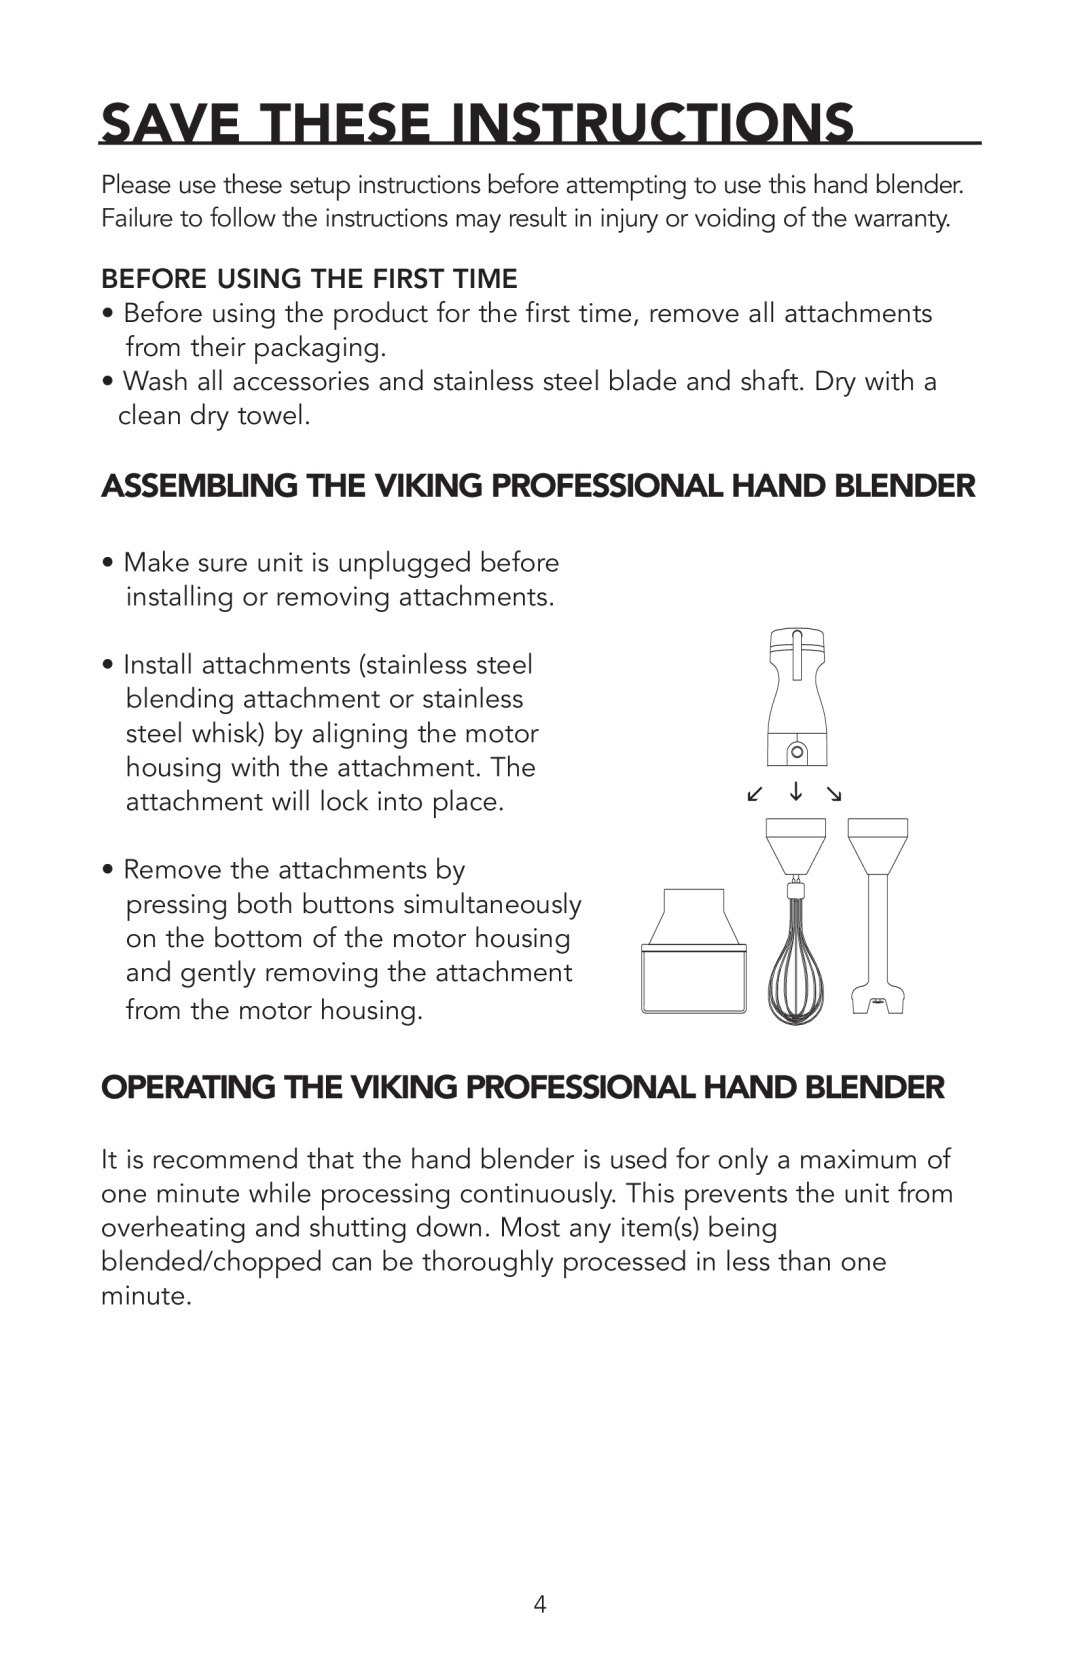 Viking VHB300 manual Save These Instructions, Assembling The Viking Professional Hand Blender, Before Using The First Time 